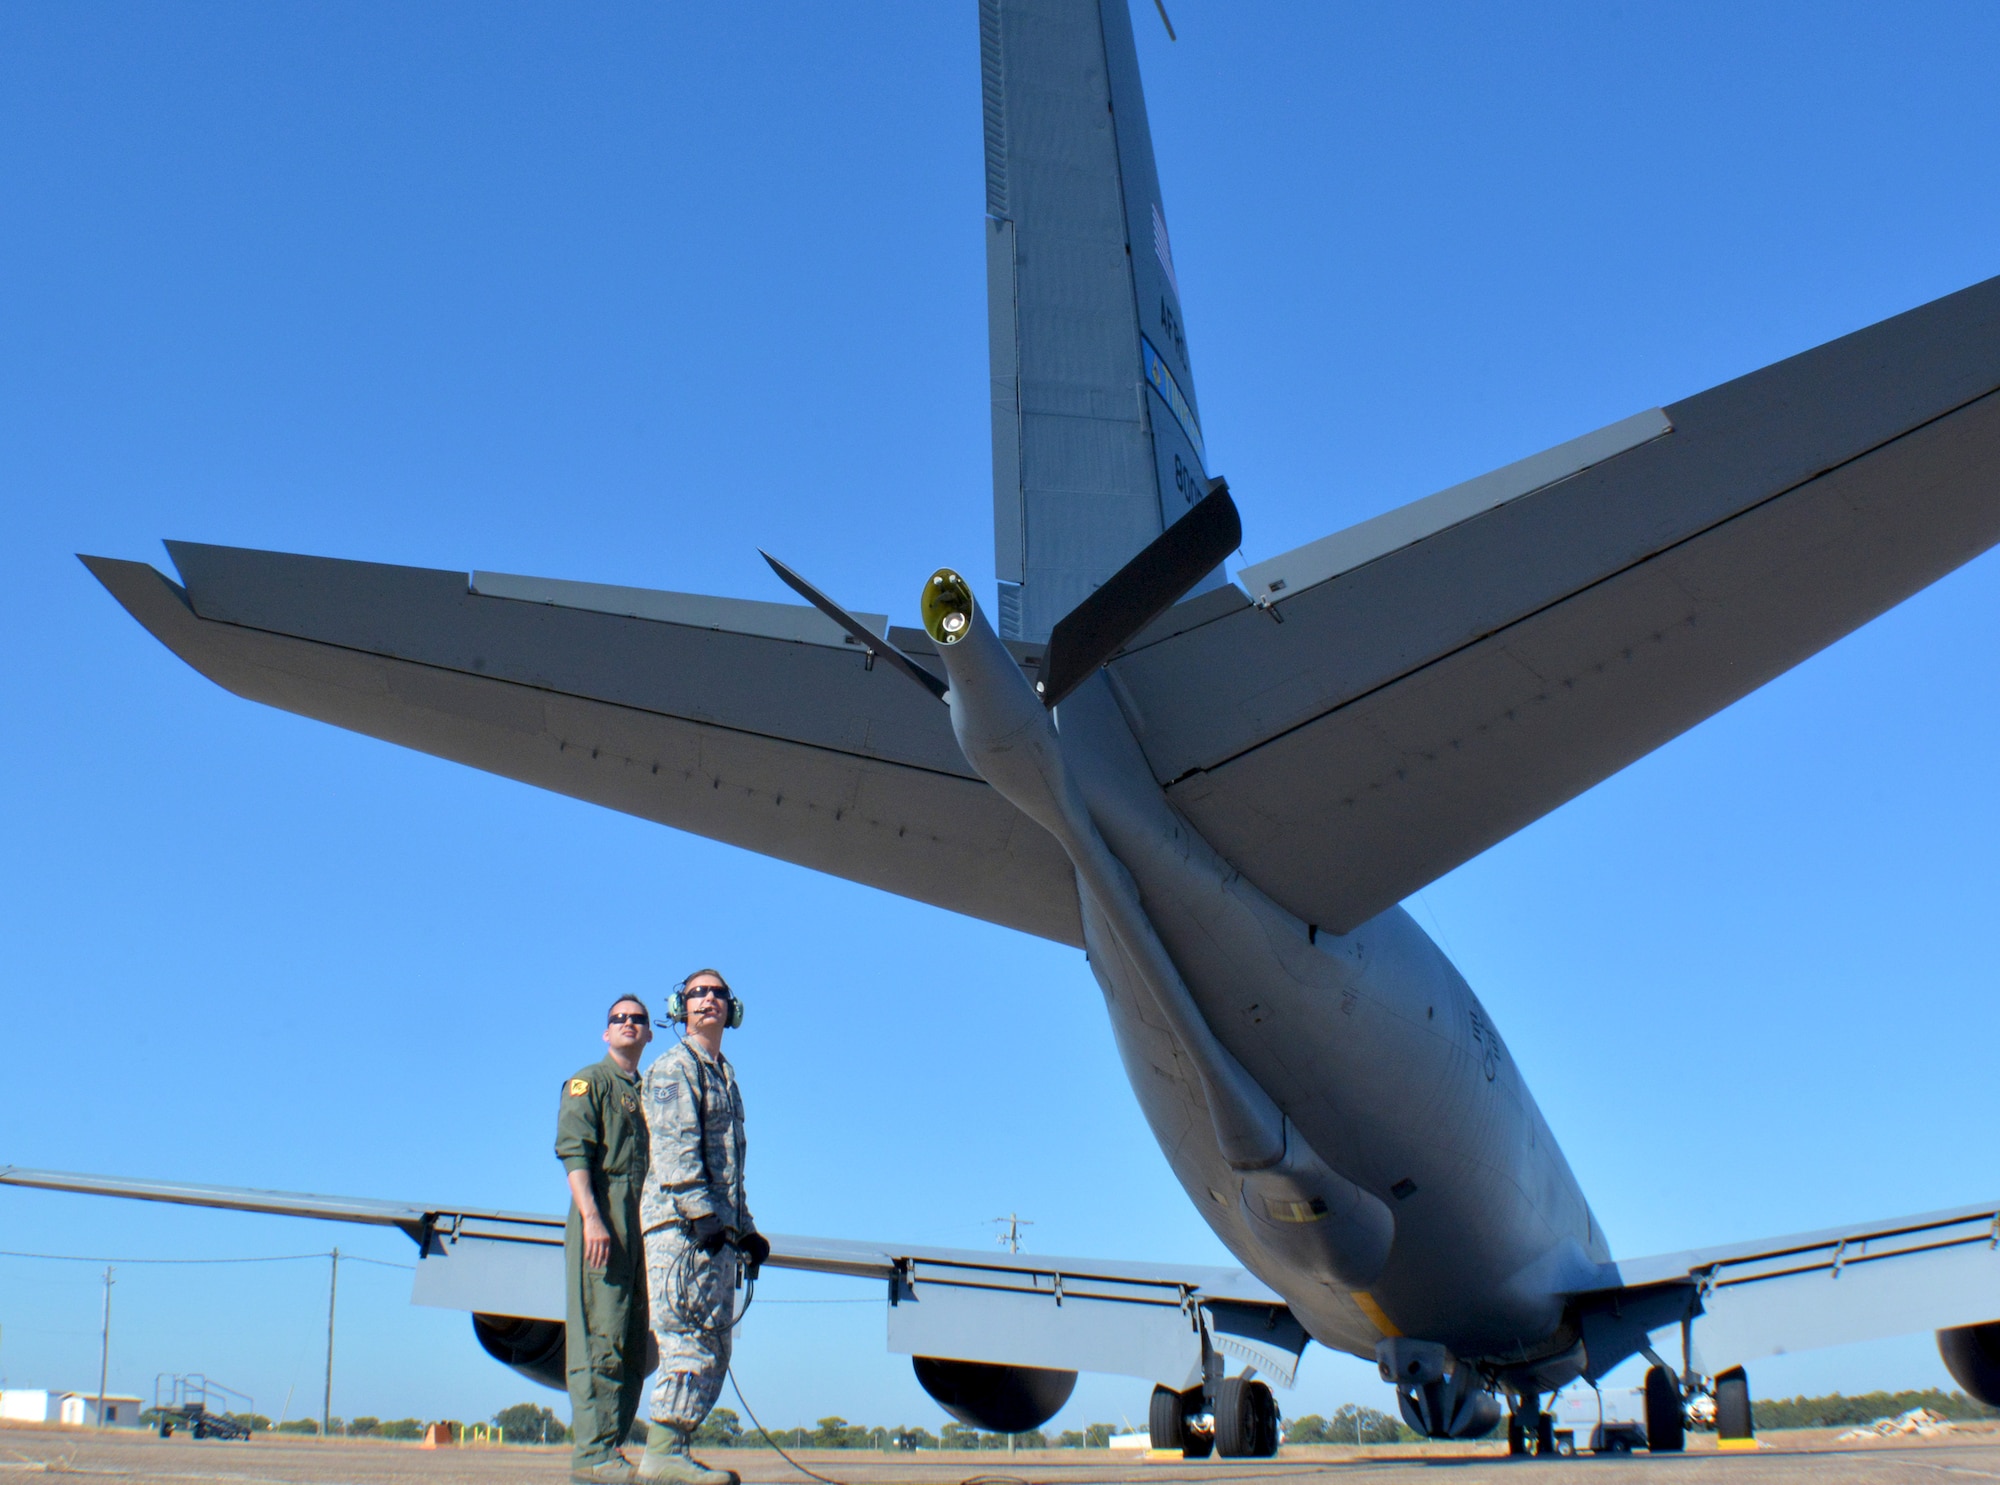 507th Aircraft Maintenace Squadron crew chief, Tech. Sgt. Michael Dunning, and avionics technician, Tech. Sgt. Eric Harmon, from Tinker Air Force Base, Okla., look up at a flying jet while preparing a KC-135R Stratotanker for flight at Eglin Air Force Base, Fla., Nov. 28, 2017. The aircraft was reconfigured to utilize the Large Aircraft Infrared Countermeasures system and went to Fla. for testing of it's new defensive countermeasures. (U.S. Air Force photo/Tech. Sgt. Samantha Mathison)